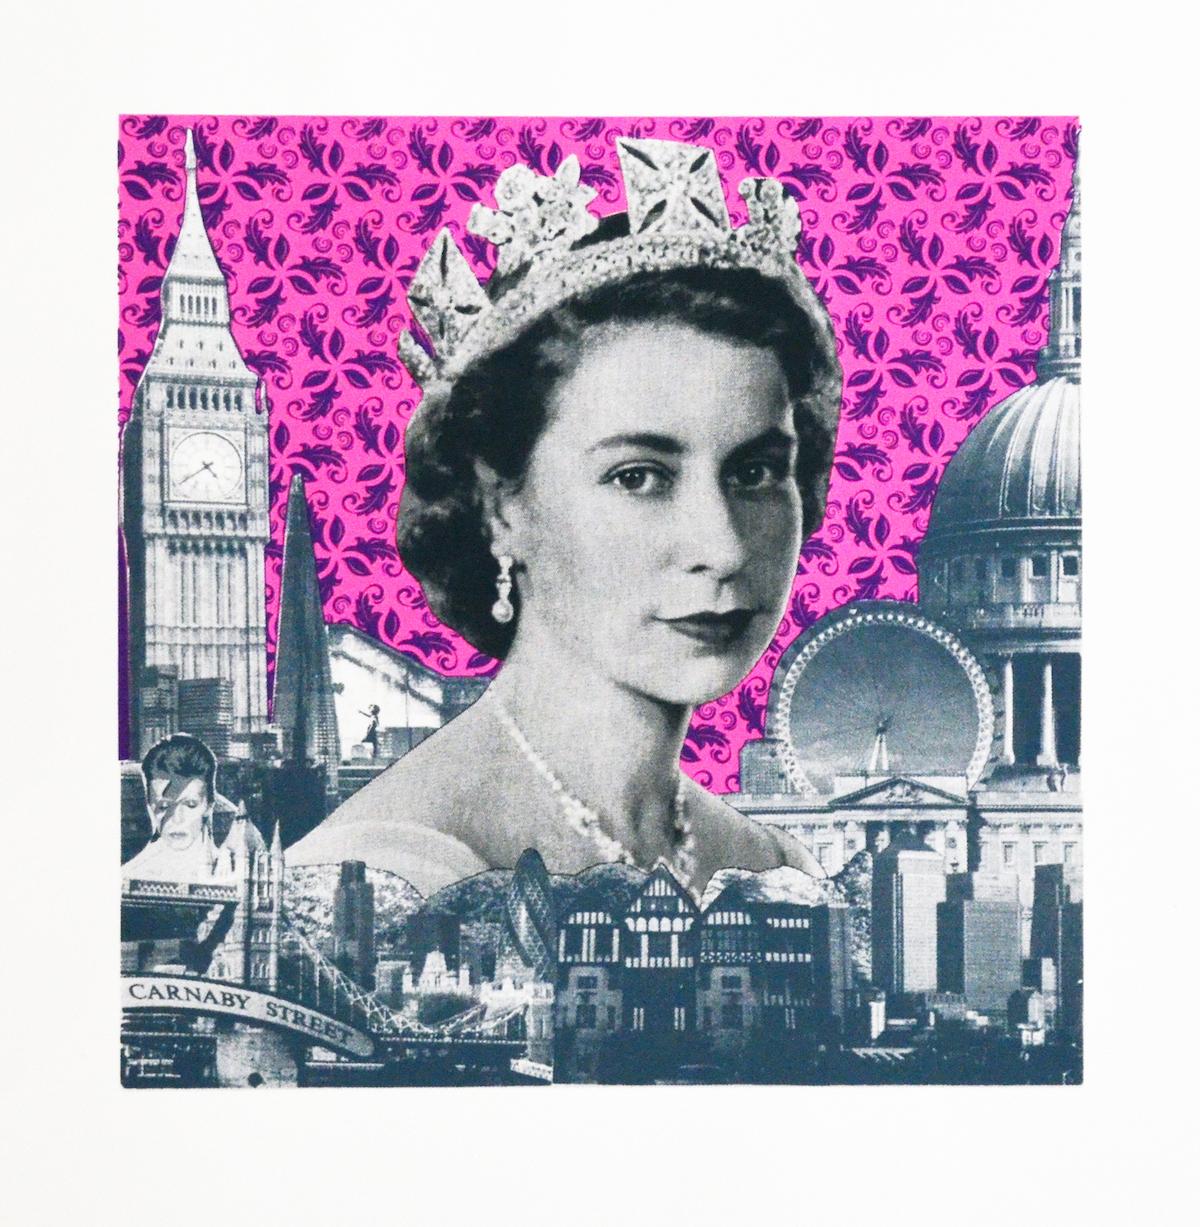 Crowing Glory, Anne Storno, Pop art, Limited edition print for sale, The Queen 